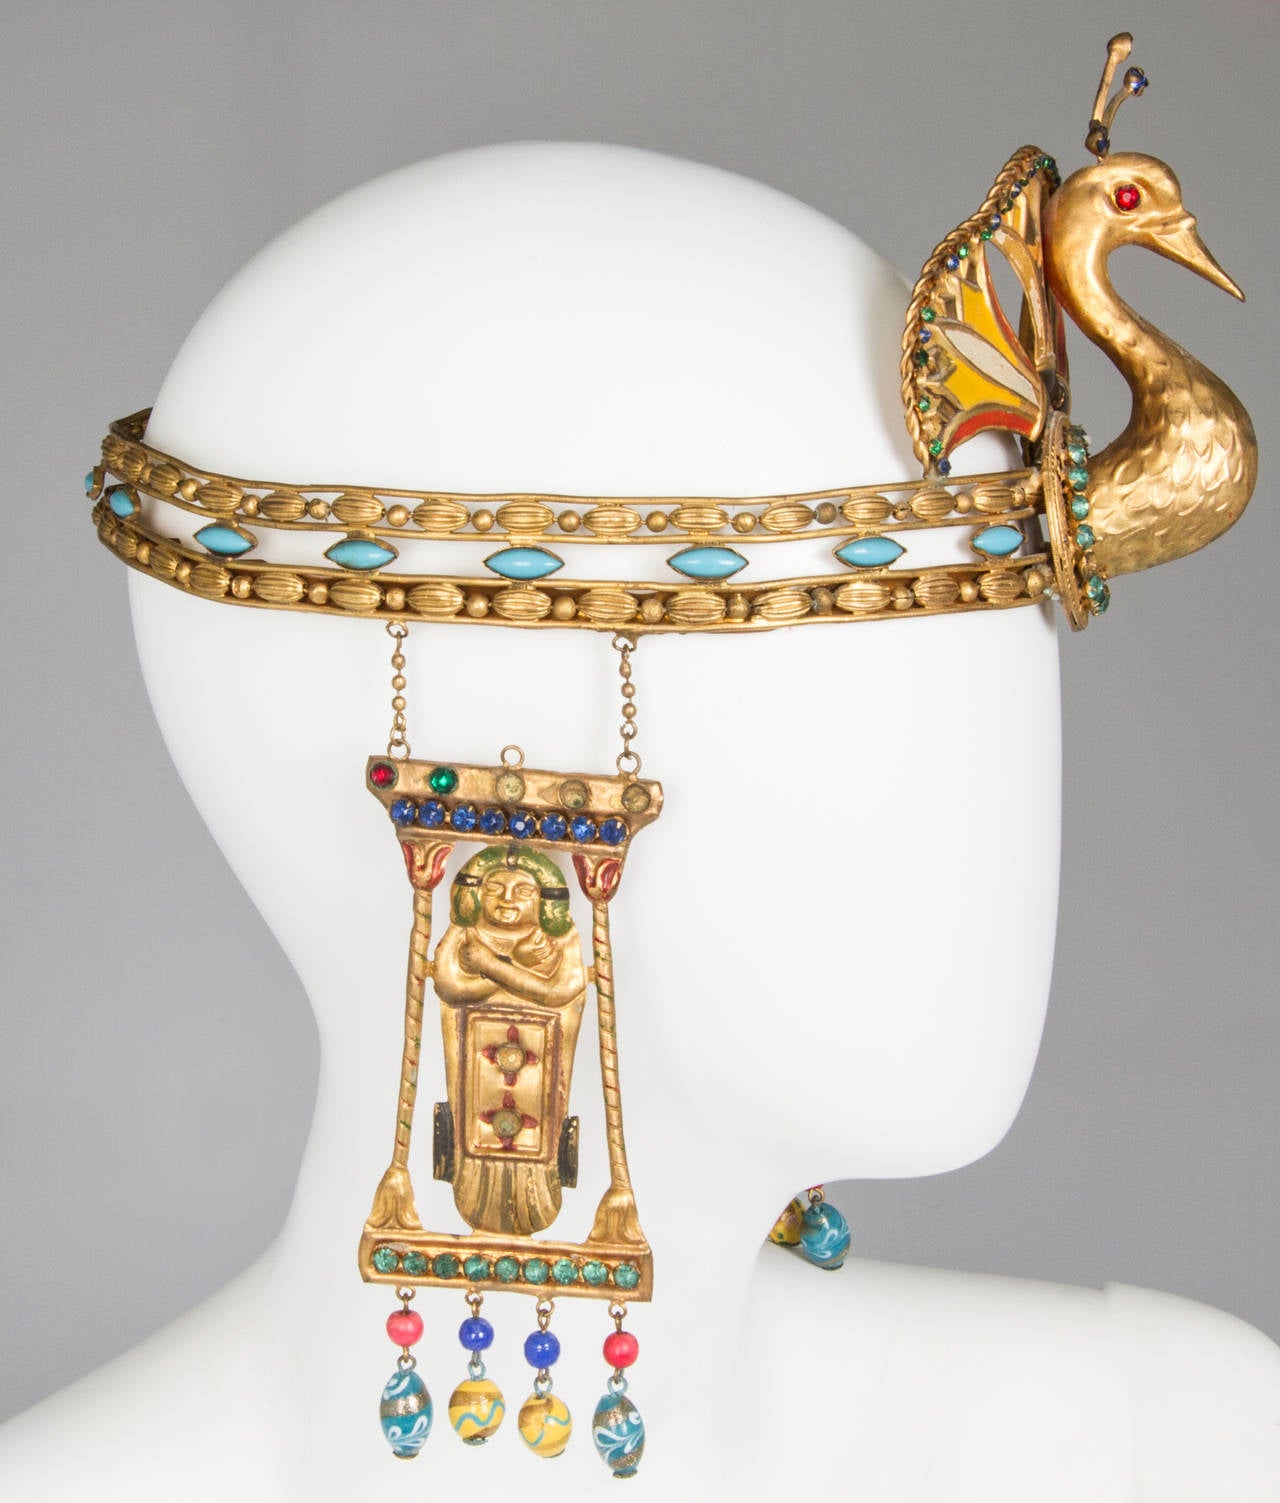 Norman Crider, whose internationally known Ballet Shop near Lincoln Center became a haven for both superstars and dance fans seeking out rare ballet related items. This is a special collection of Egyptian costumes out of Norman Crider's personal